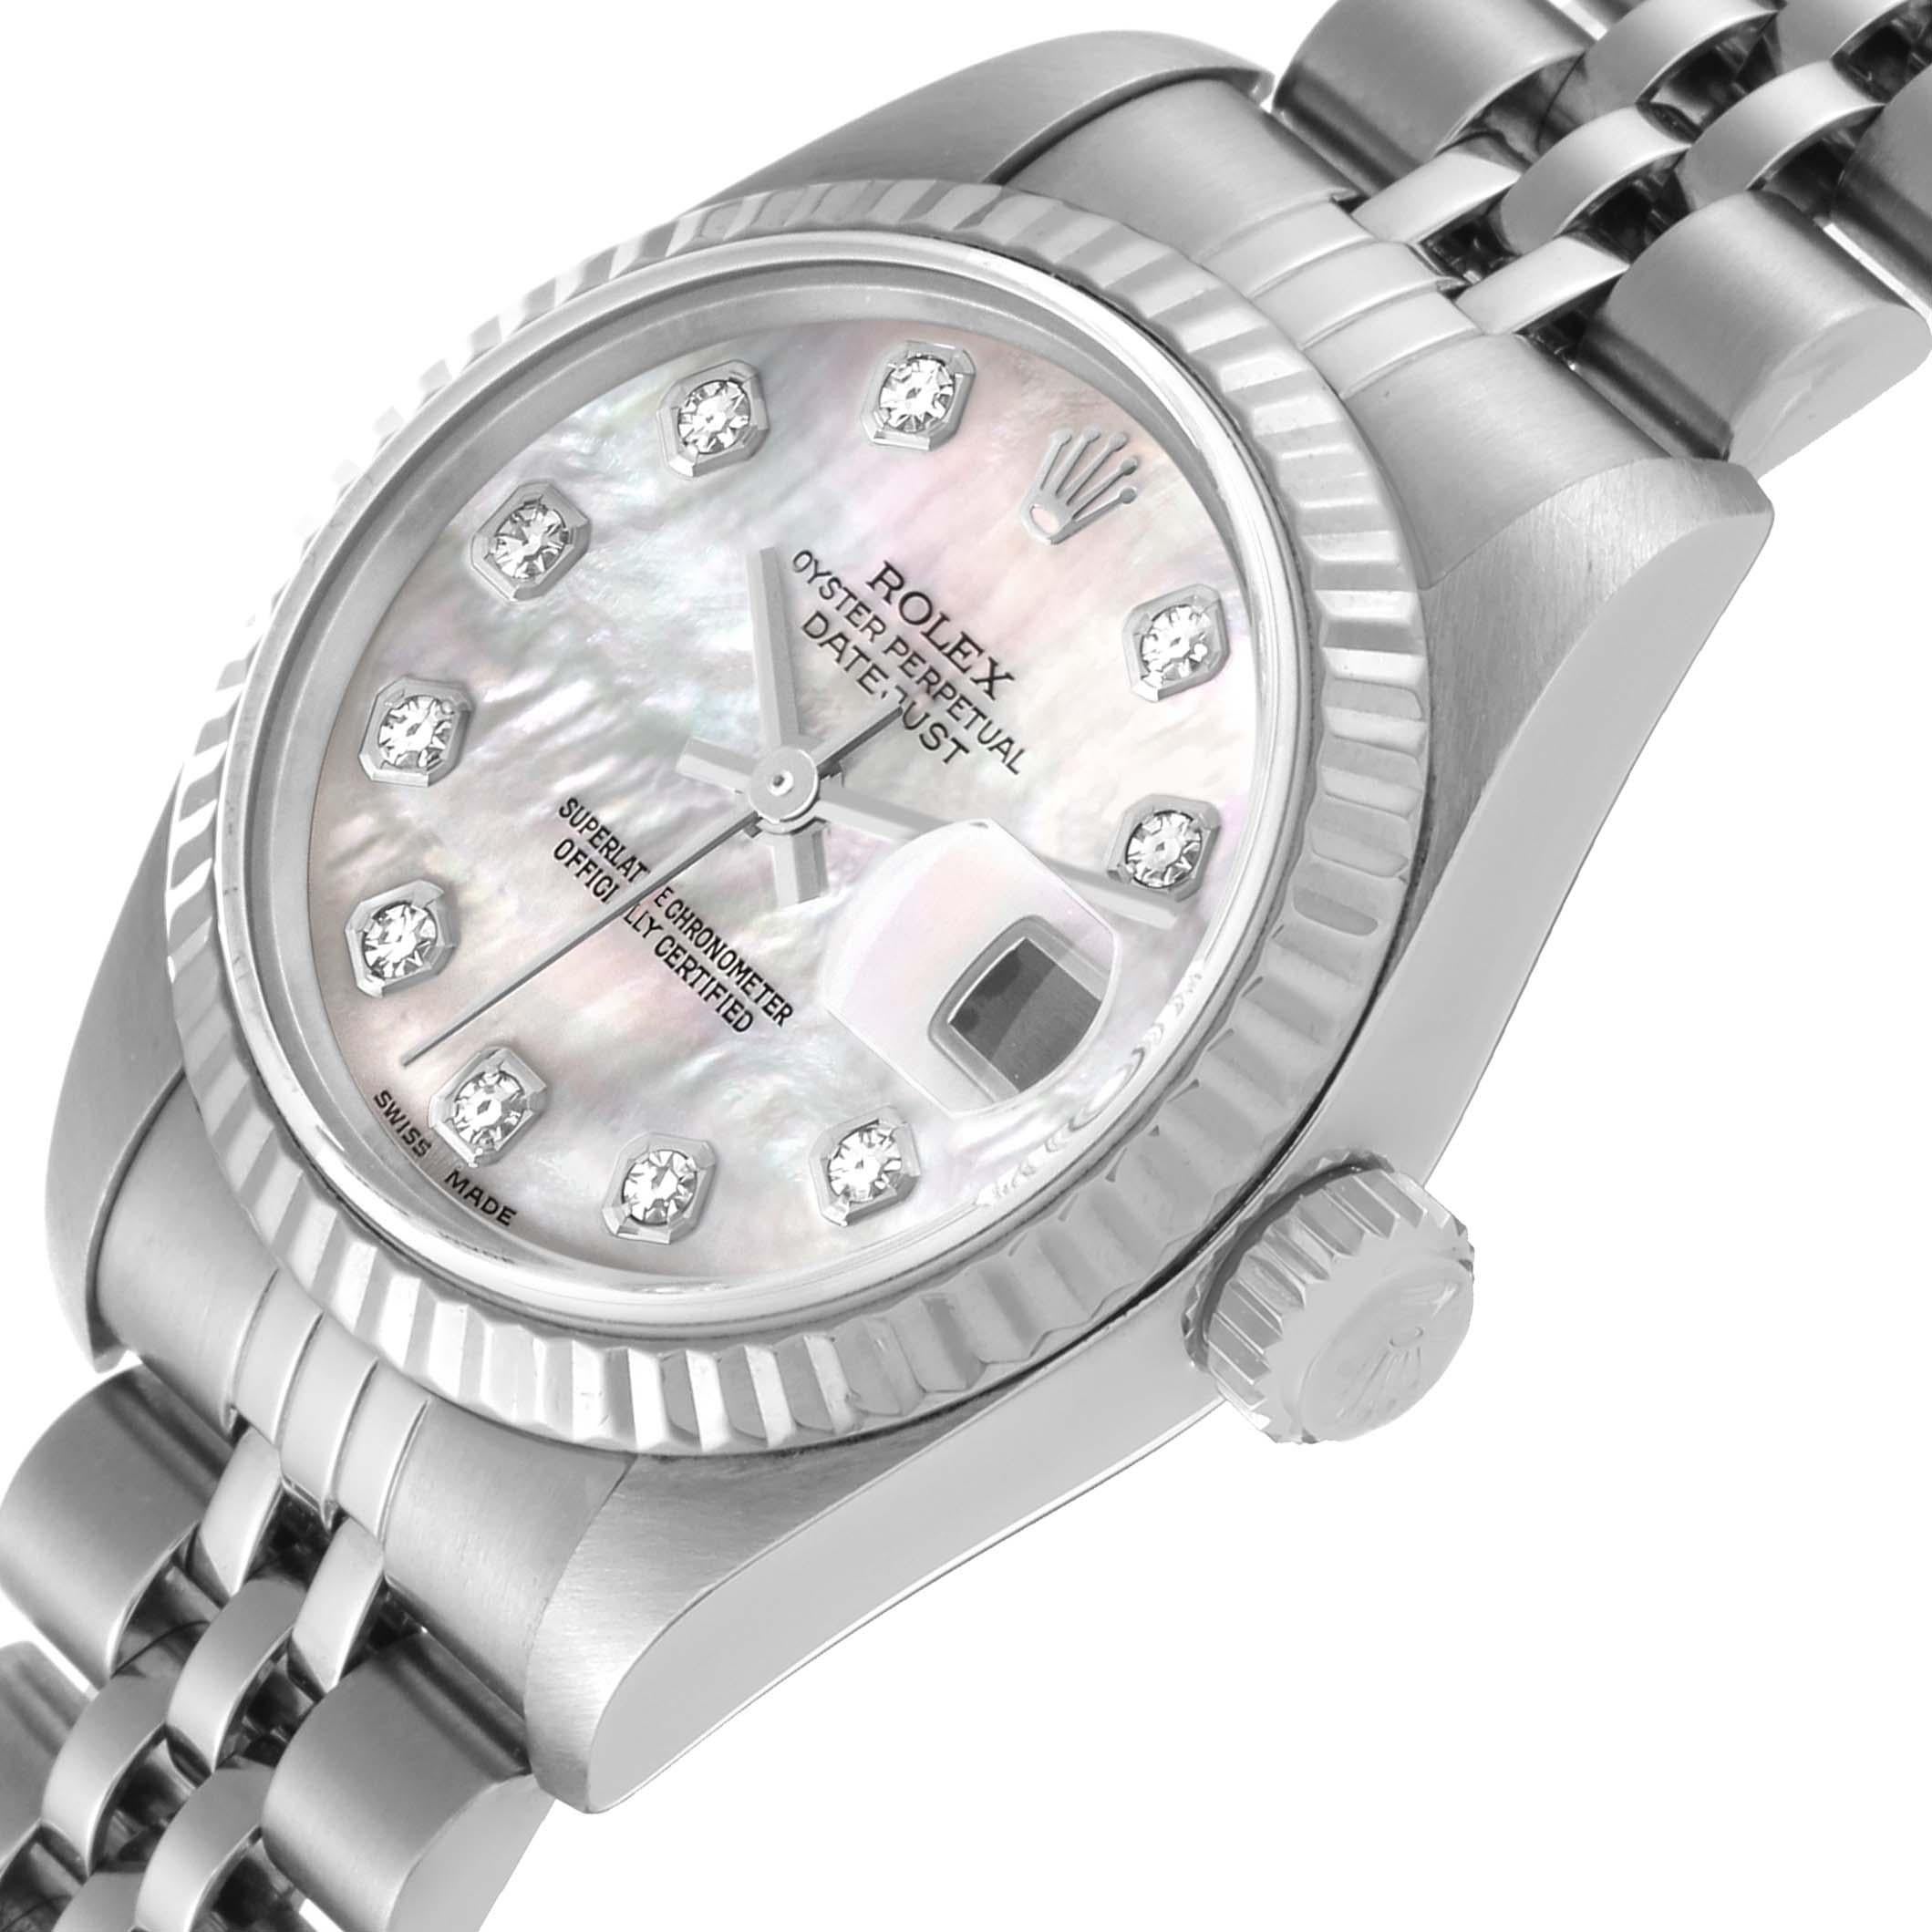 Rolex Datejust Steel White Gold Mother of Pearl Diamond Dial Ladies Watch 79174 1